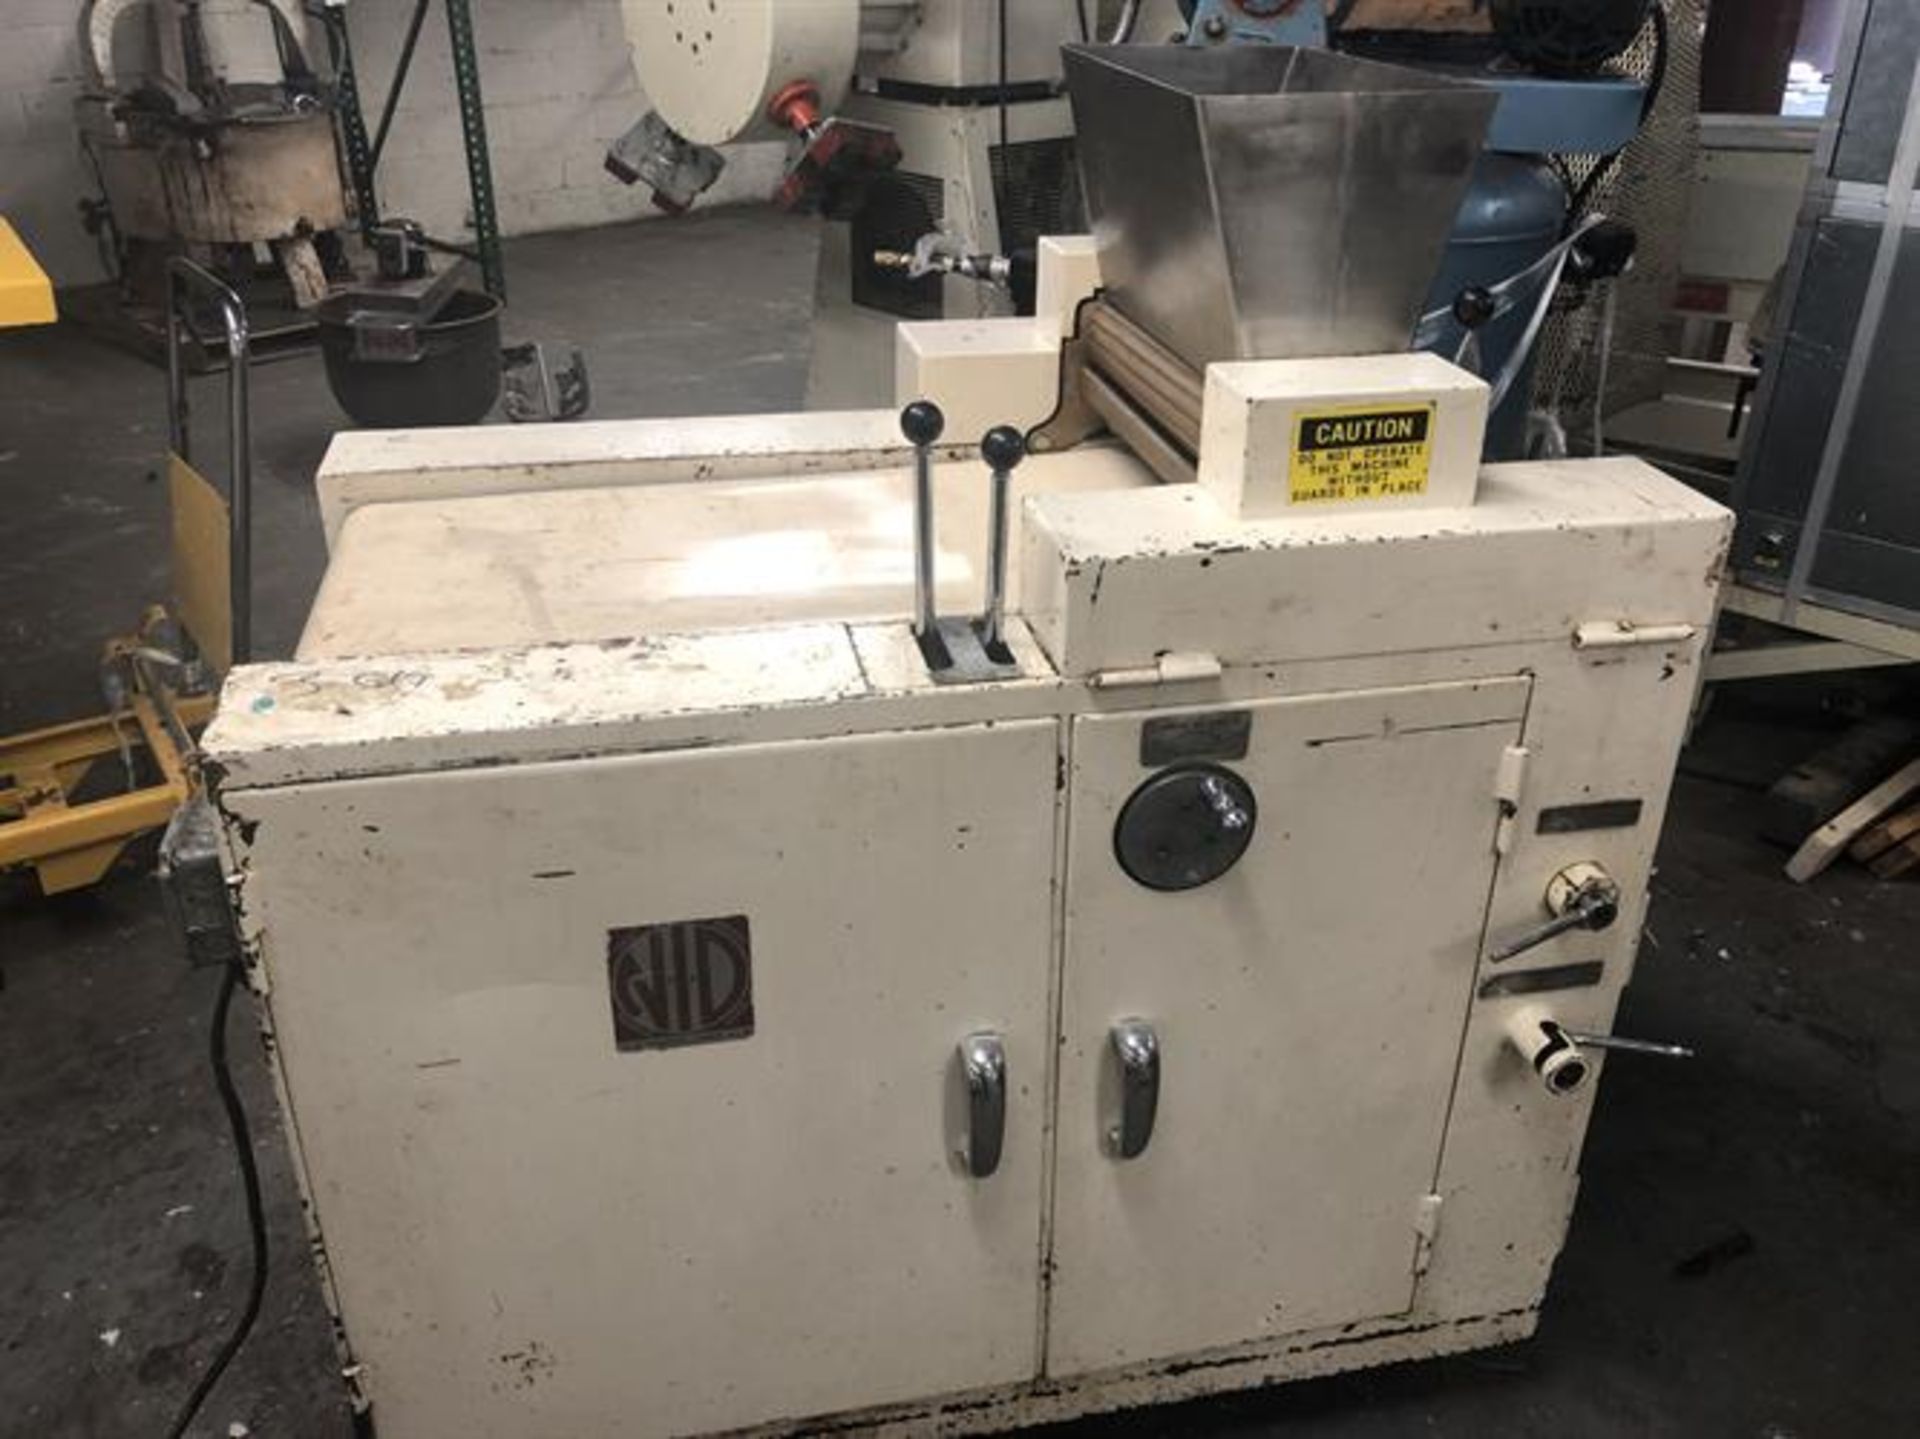 NID model M111 18" Wire-Cut Candy Extruder - 4-ft long conveyor belt - 2 dies - 1 HP, 3 phase, 60 - Image 10 of 16